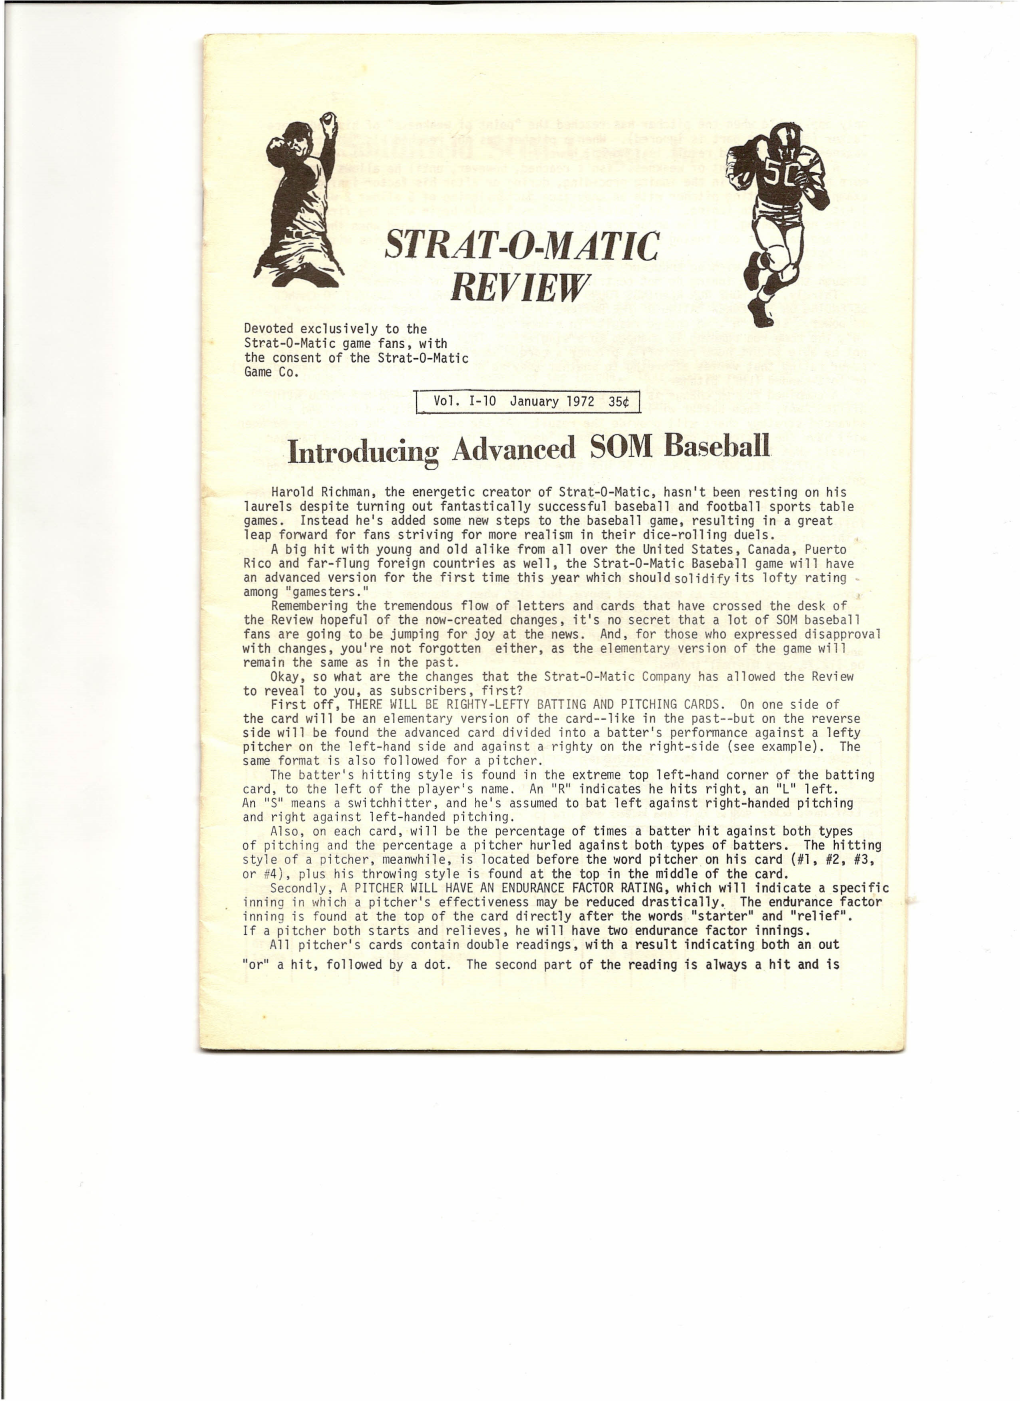 STRAT-O-MATIC REVIEW Devoted Exclusively to the Strat-O-Matic Game Fans, with the Consent of the Strat-O-Matic Game Co